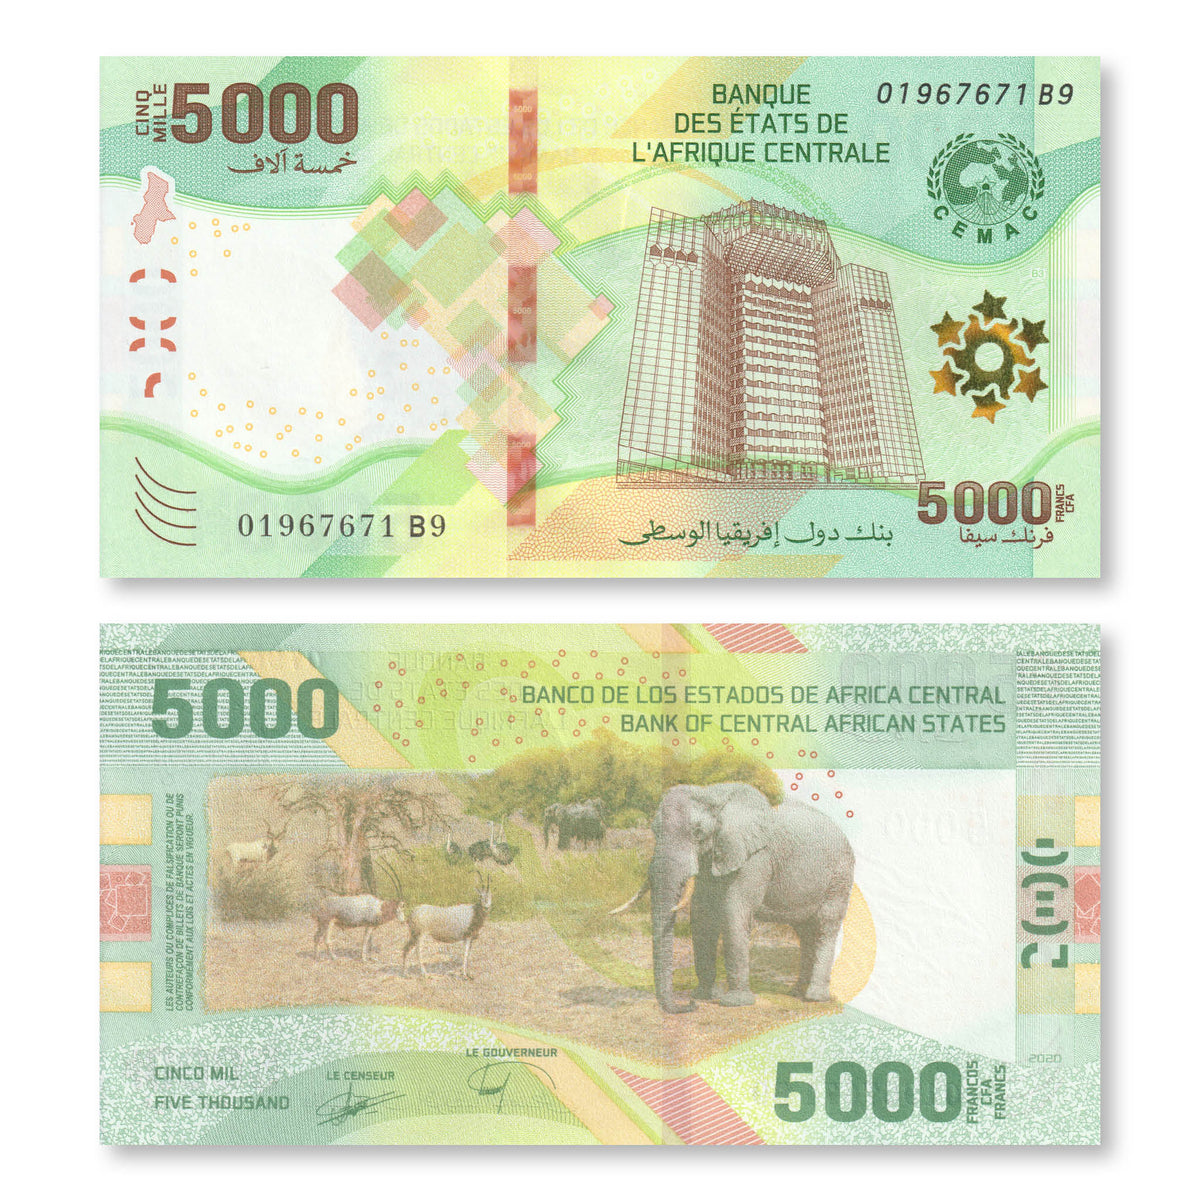 Central African States 5000 Francs, 2020 (2022), B114a, UNC - Robert's World Money - World Banknotes